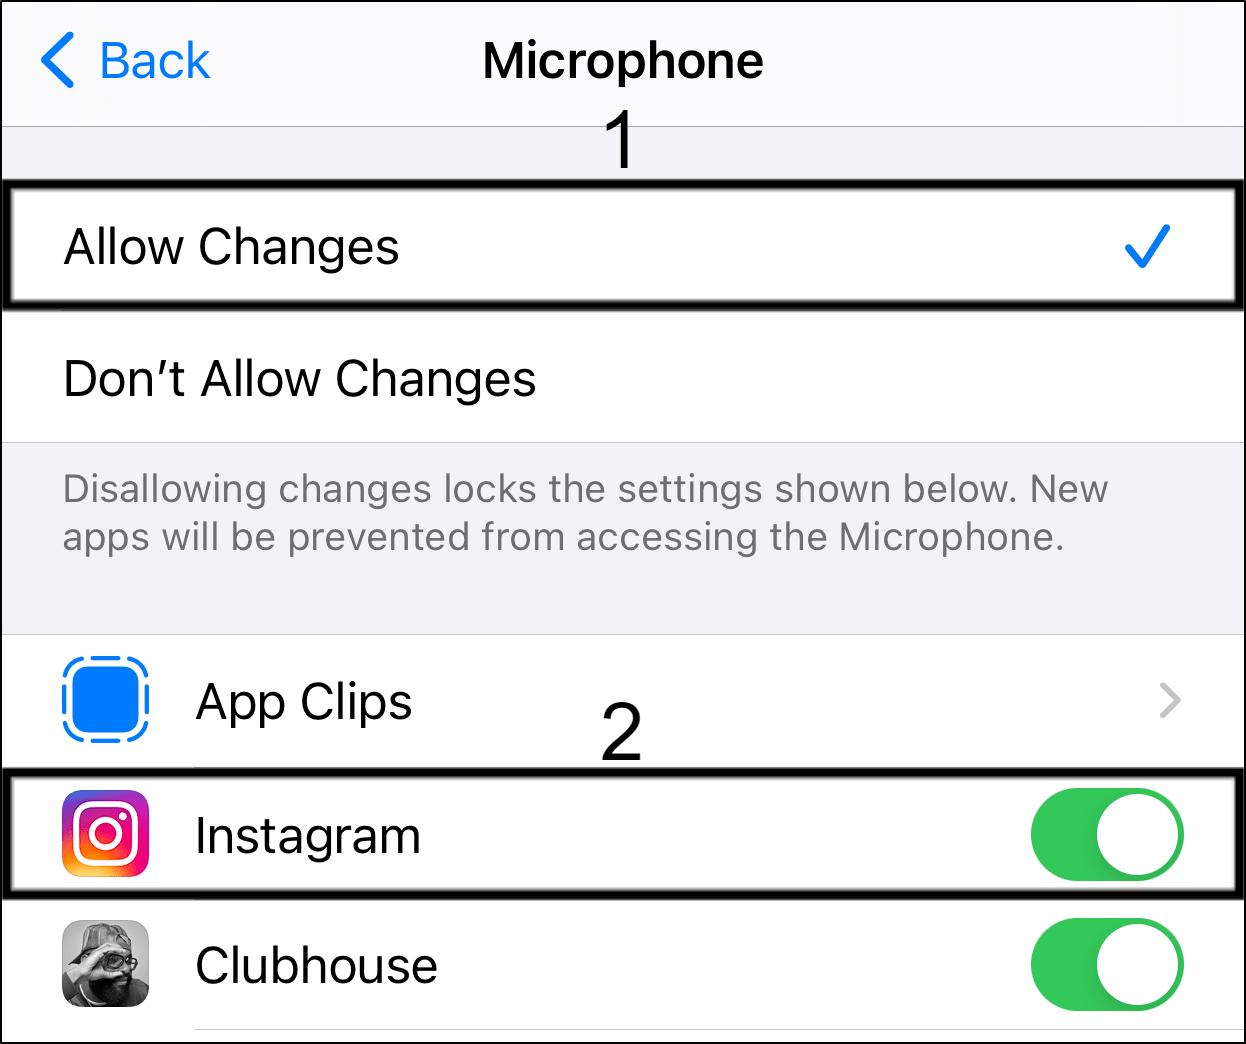 check screen time restriction settings for Instagram app to fix Instagram microphone or voice/audio message/note not working, sending or playing